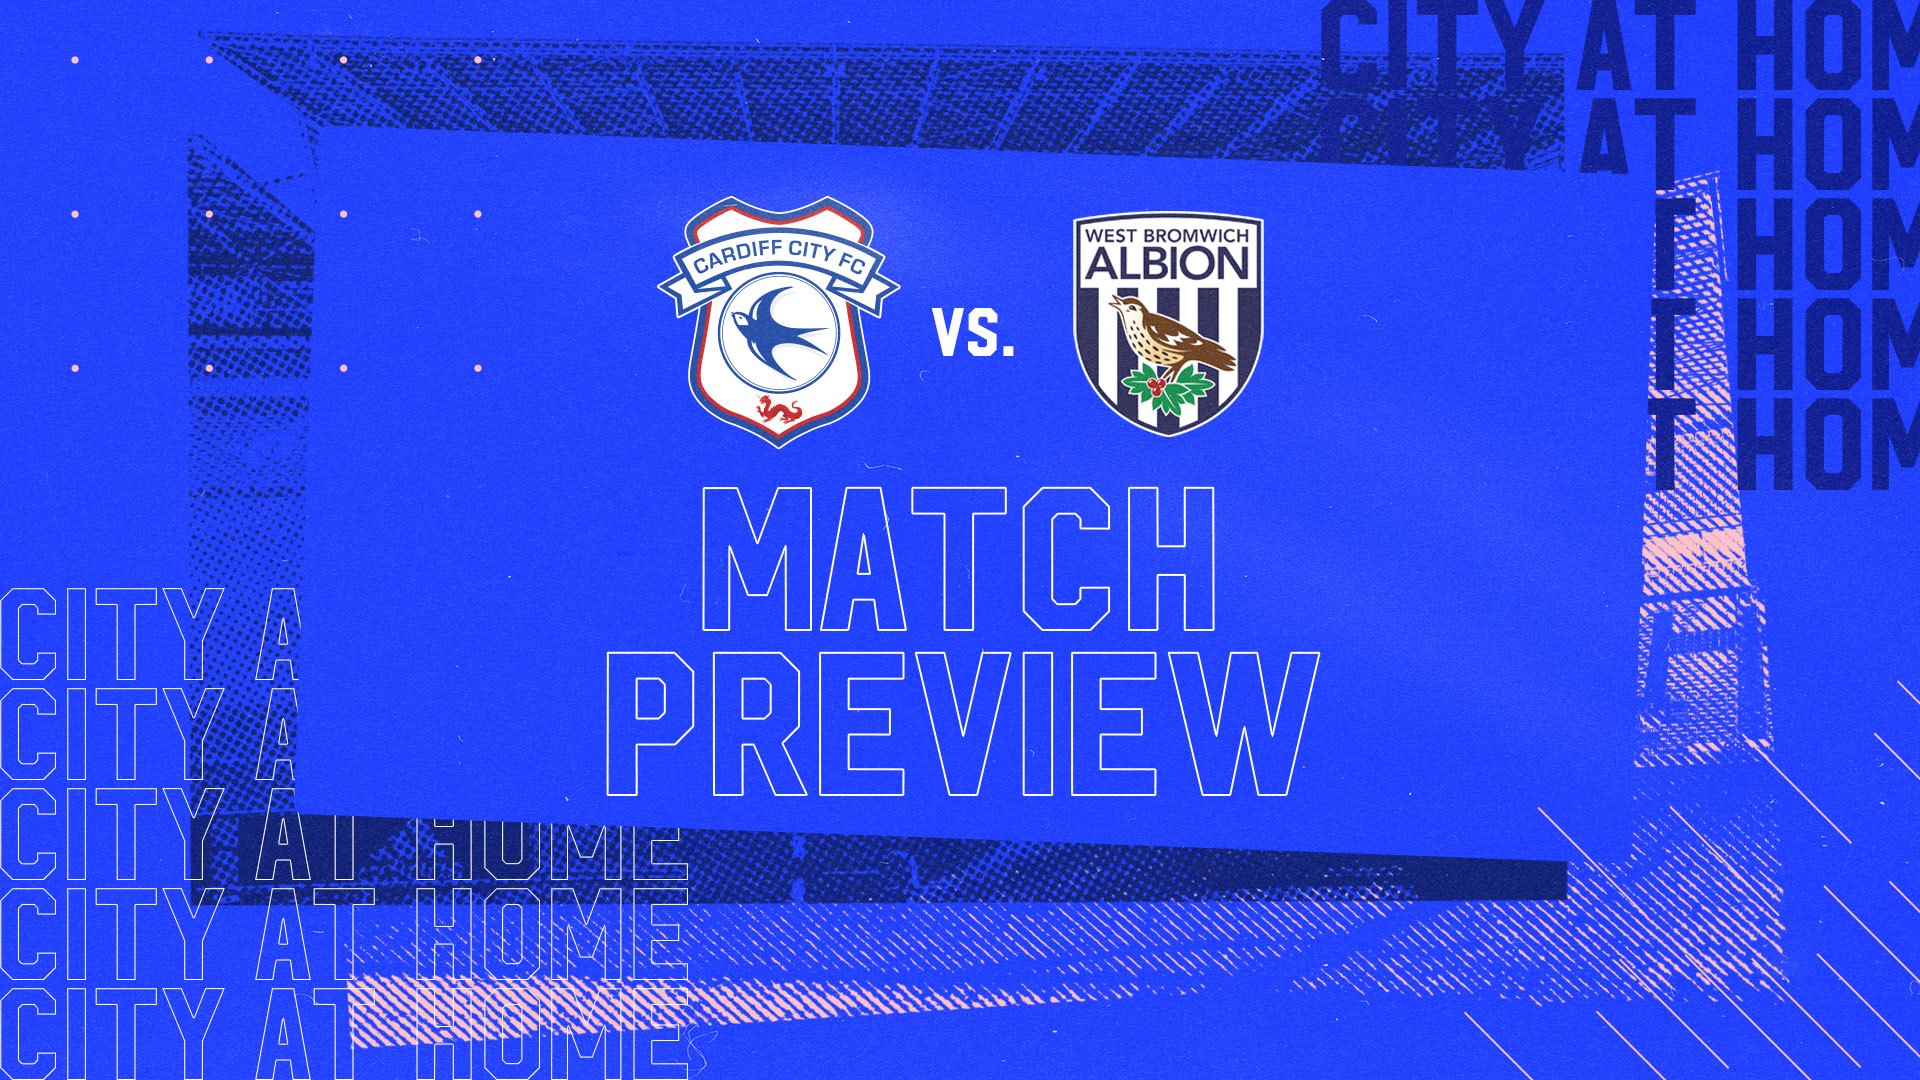 West Bromwich Albion visit CCS this Tuesday night...